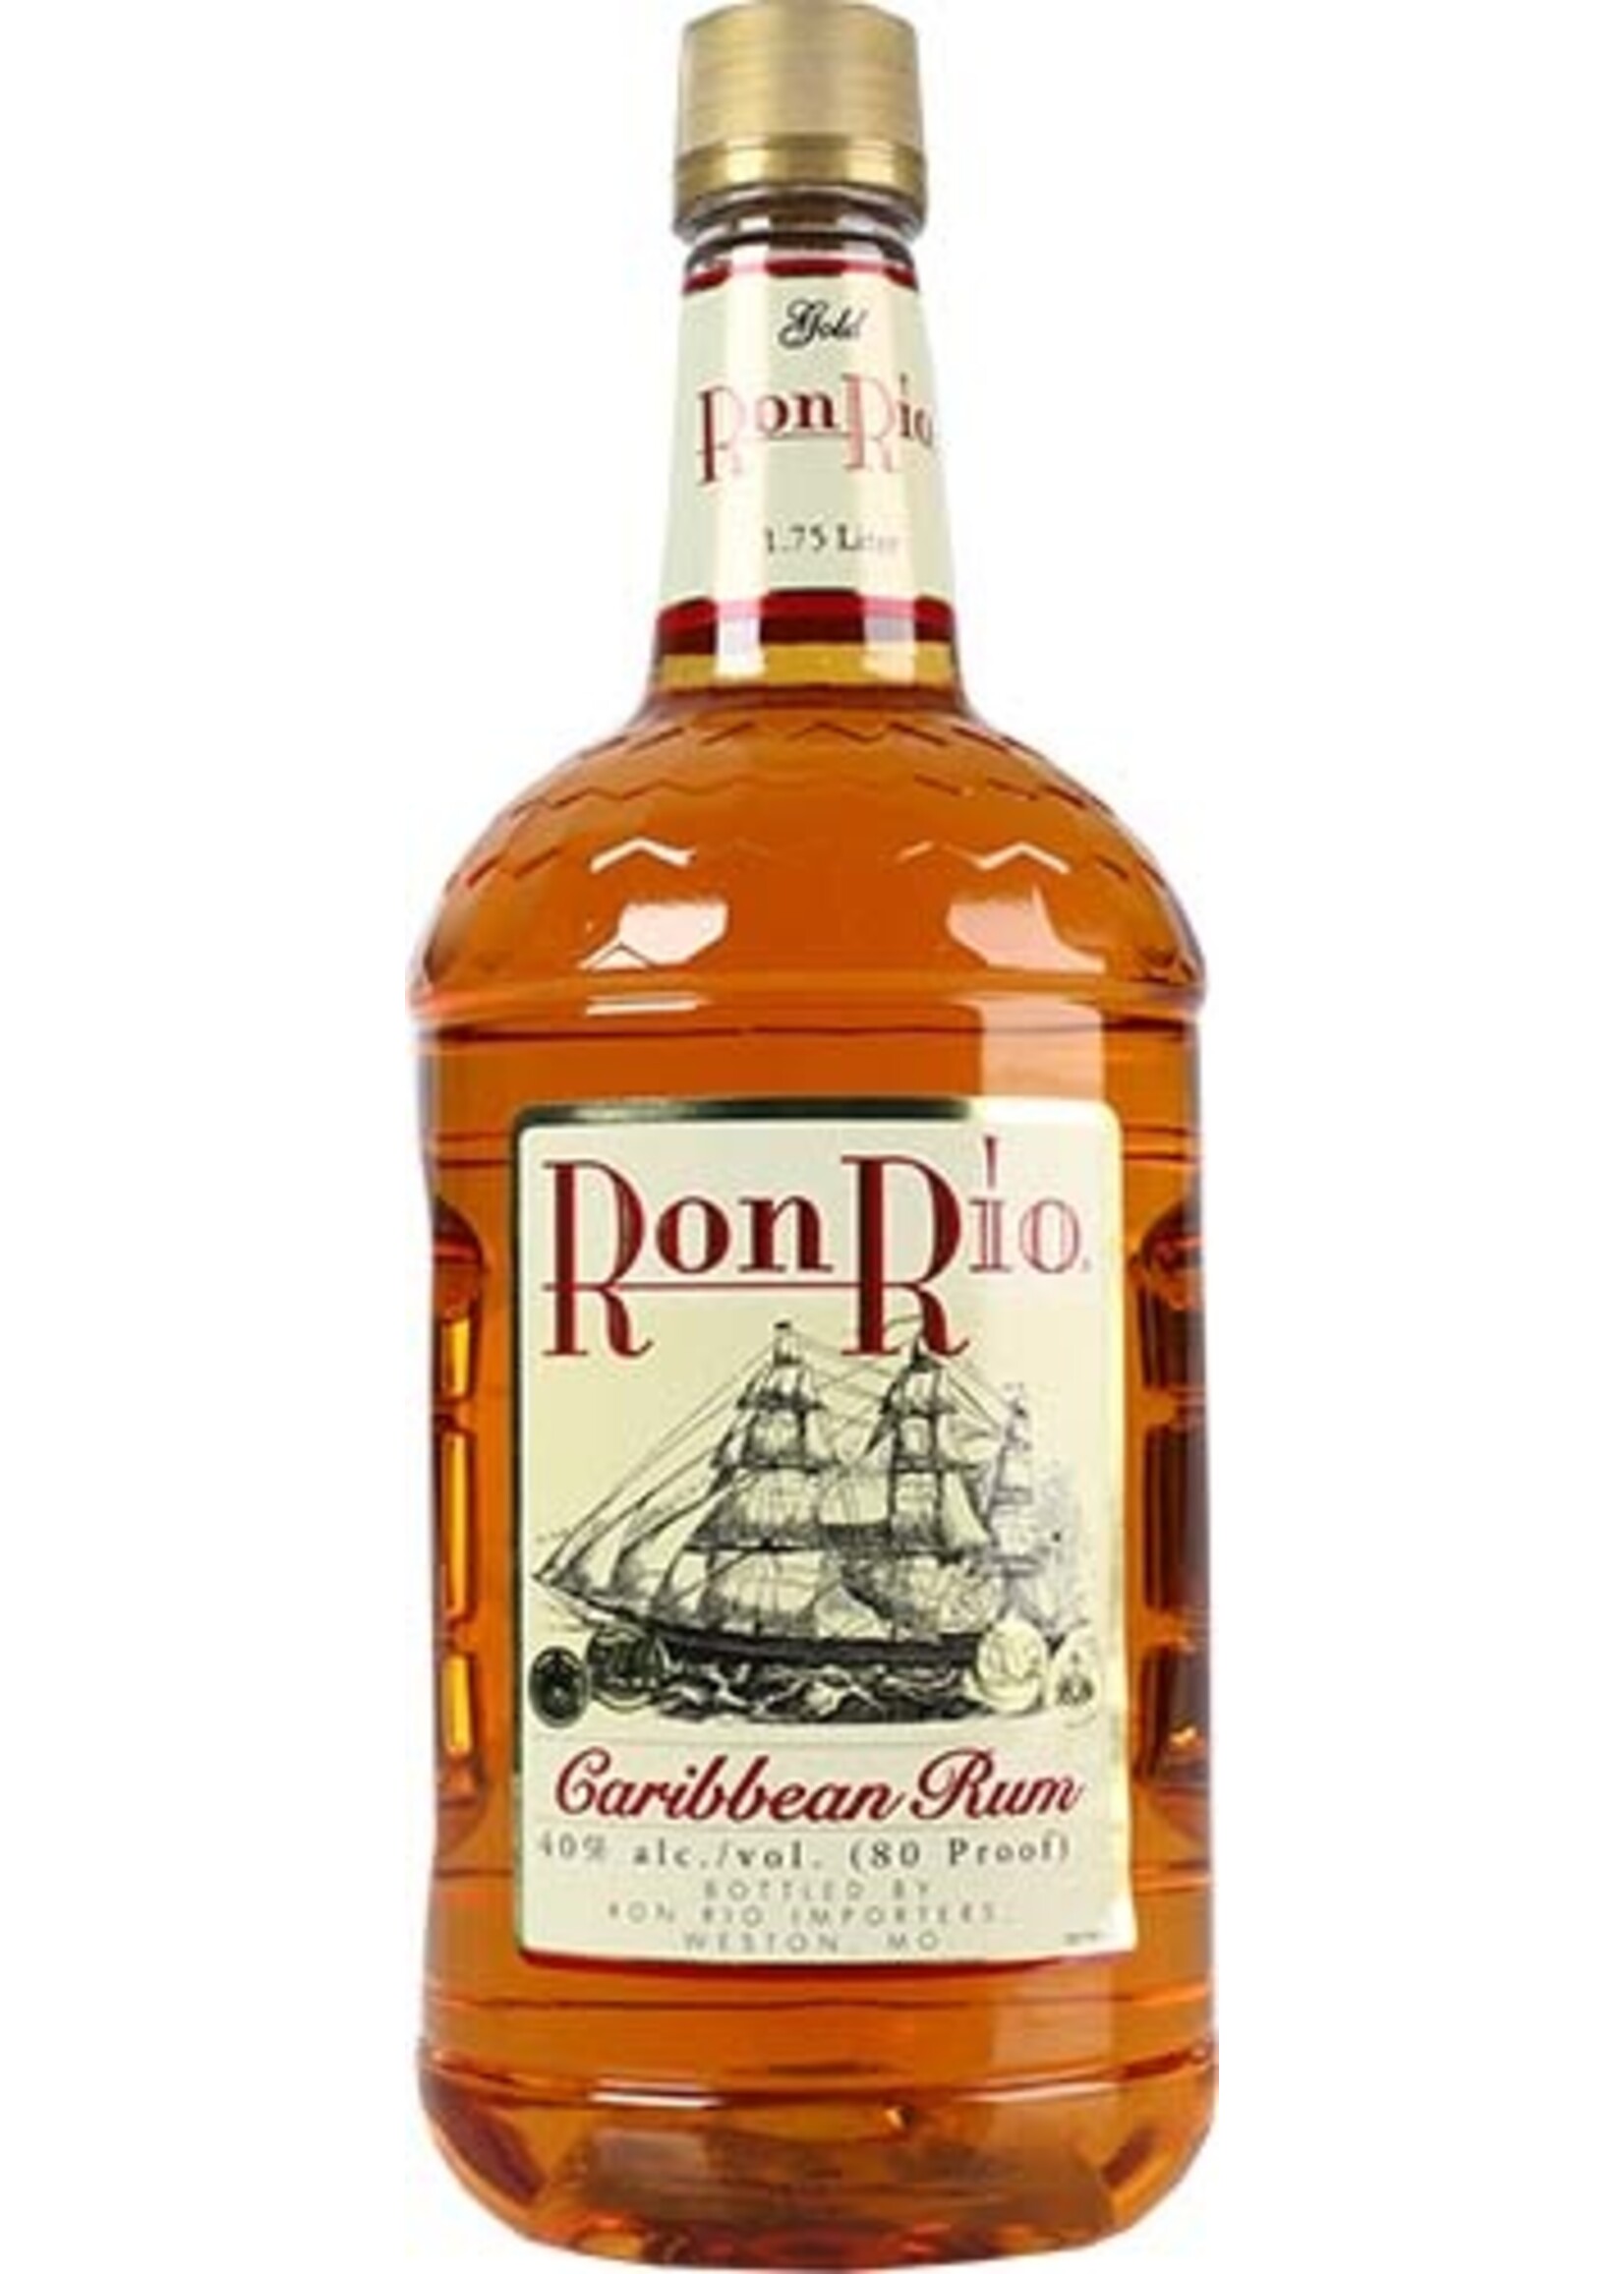 Ron Rio Gold Rum 80Proof 1.75 Ltr